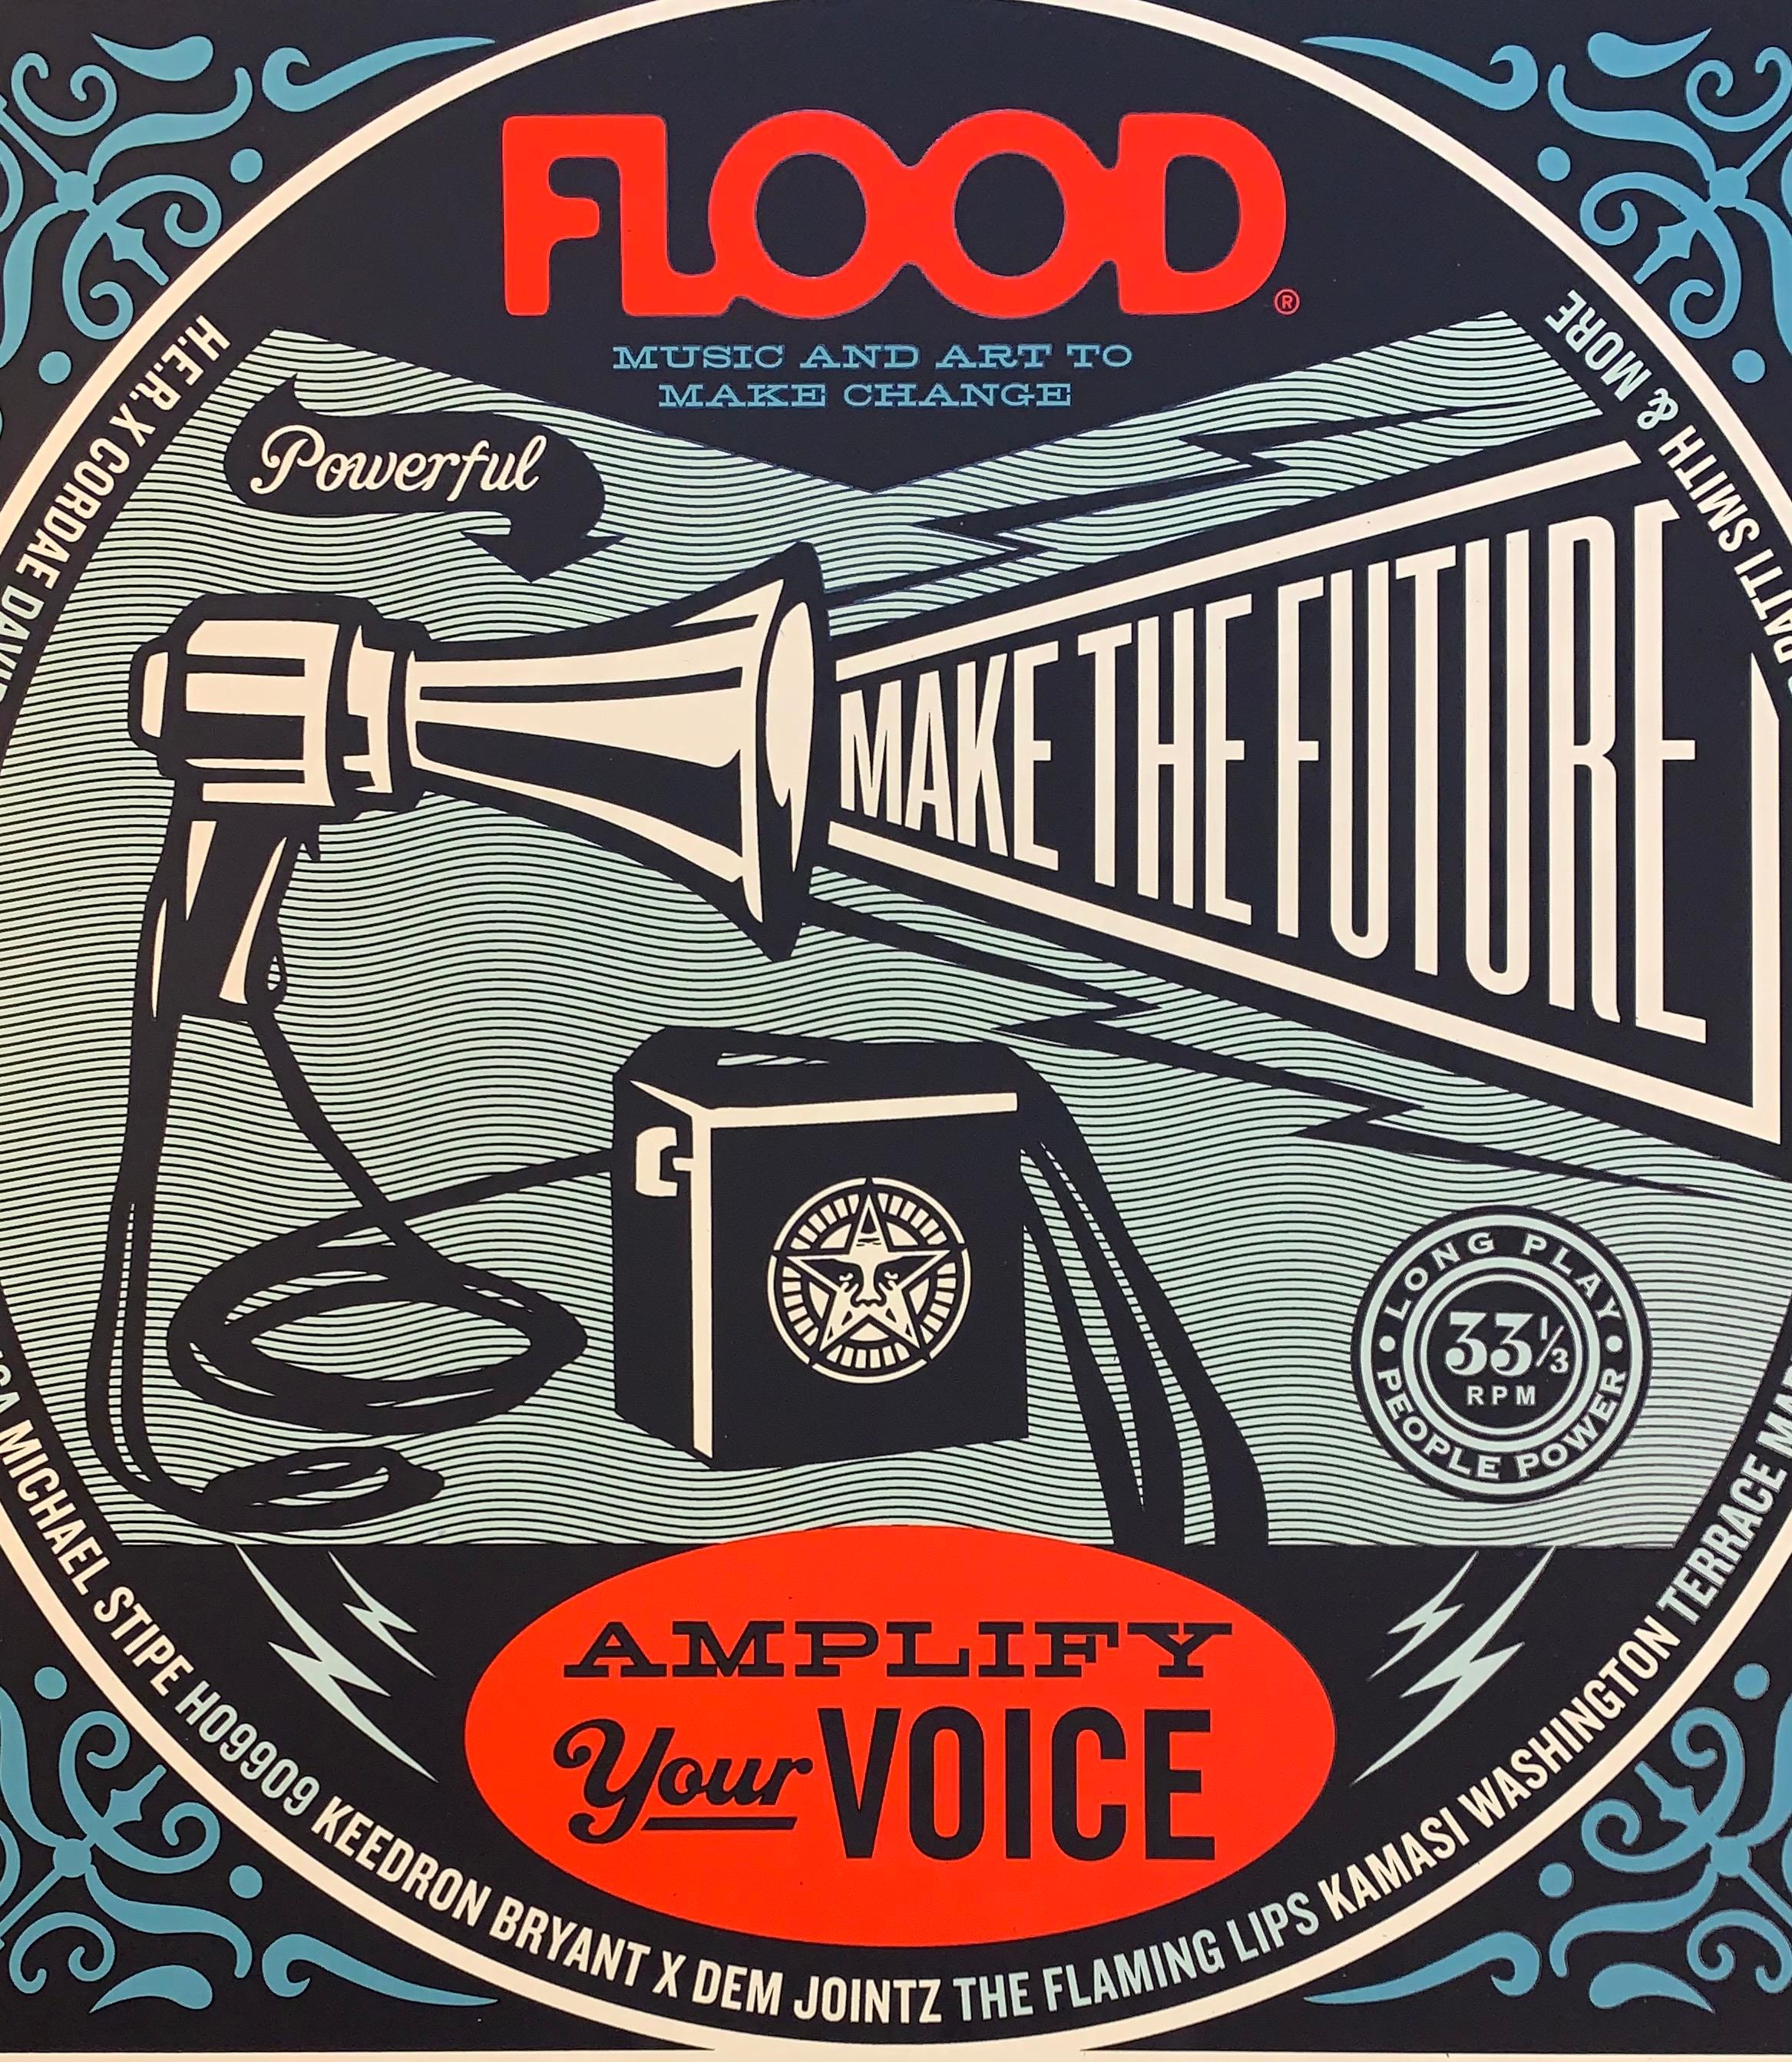 Shepard Fairey Obey Giant Flood Magazine Print Music Amplify Your Voice Politic  For Sale 3